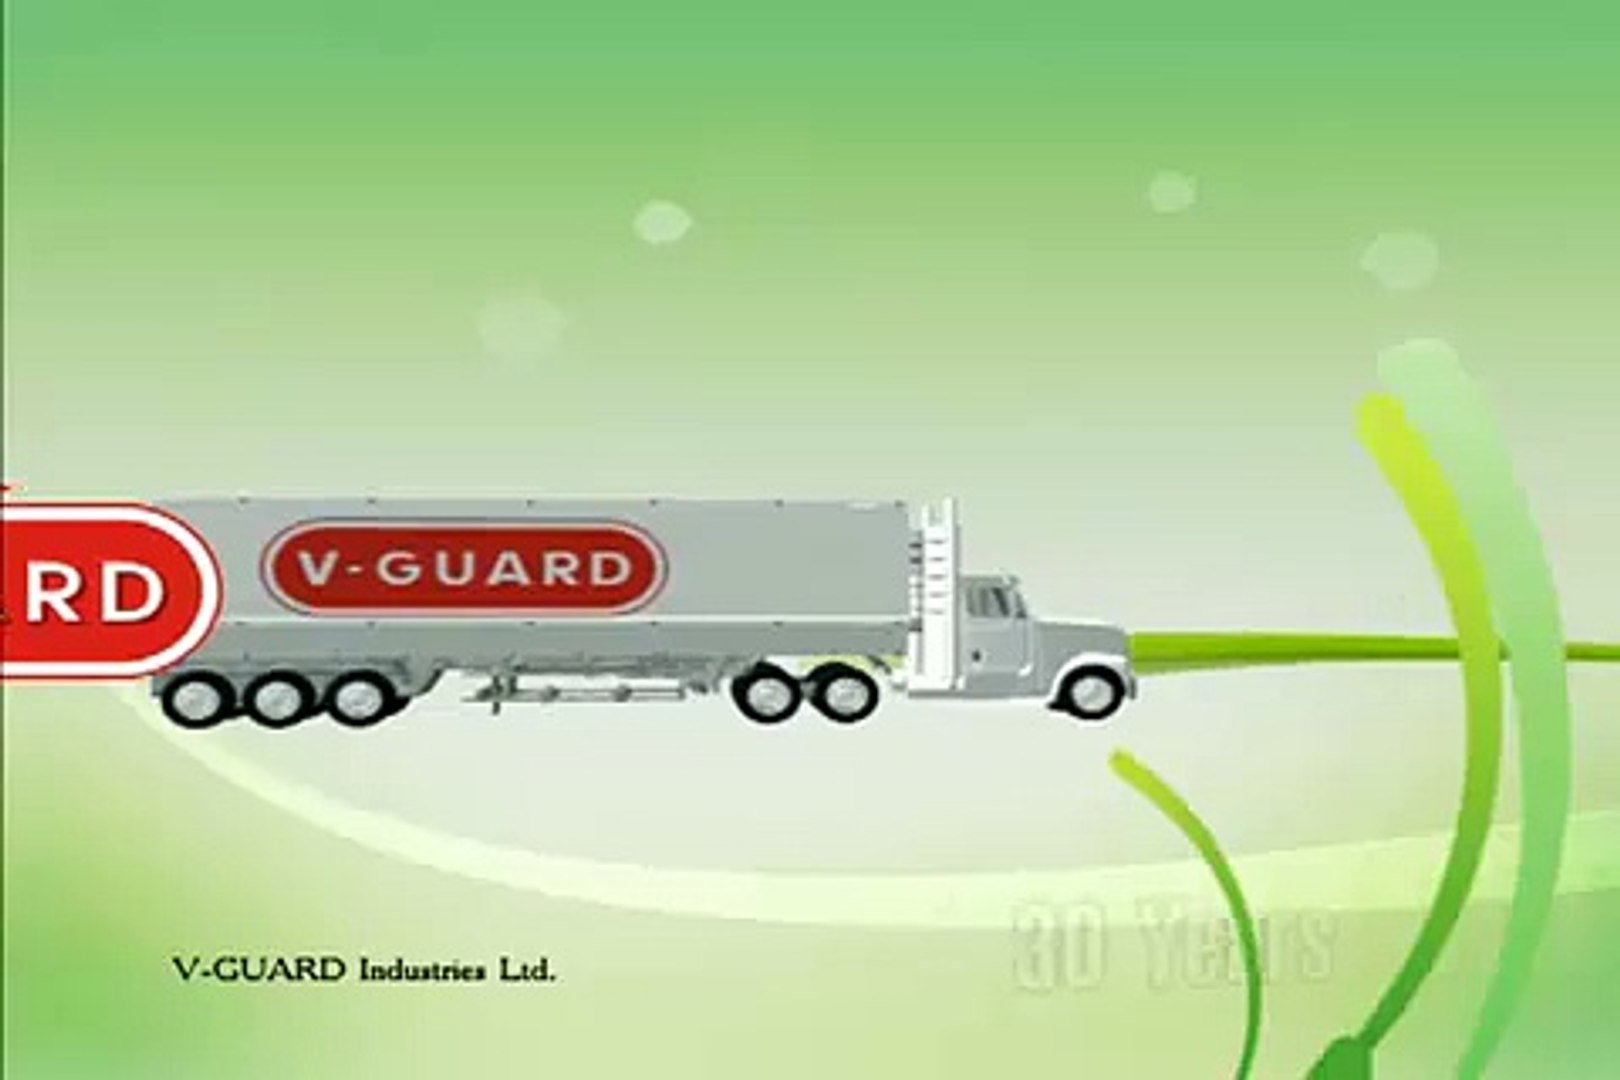 Vguard Corporate Animation Film by www.DigitalEight.com